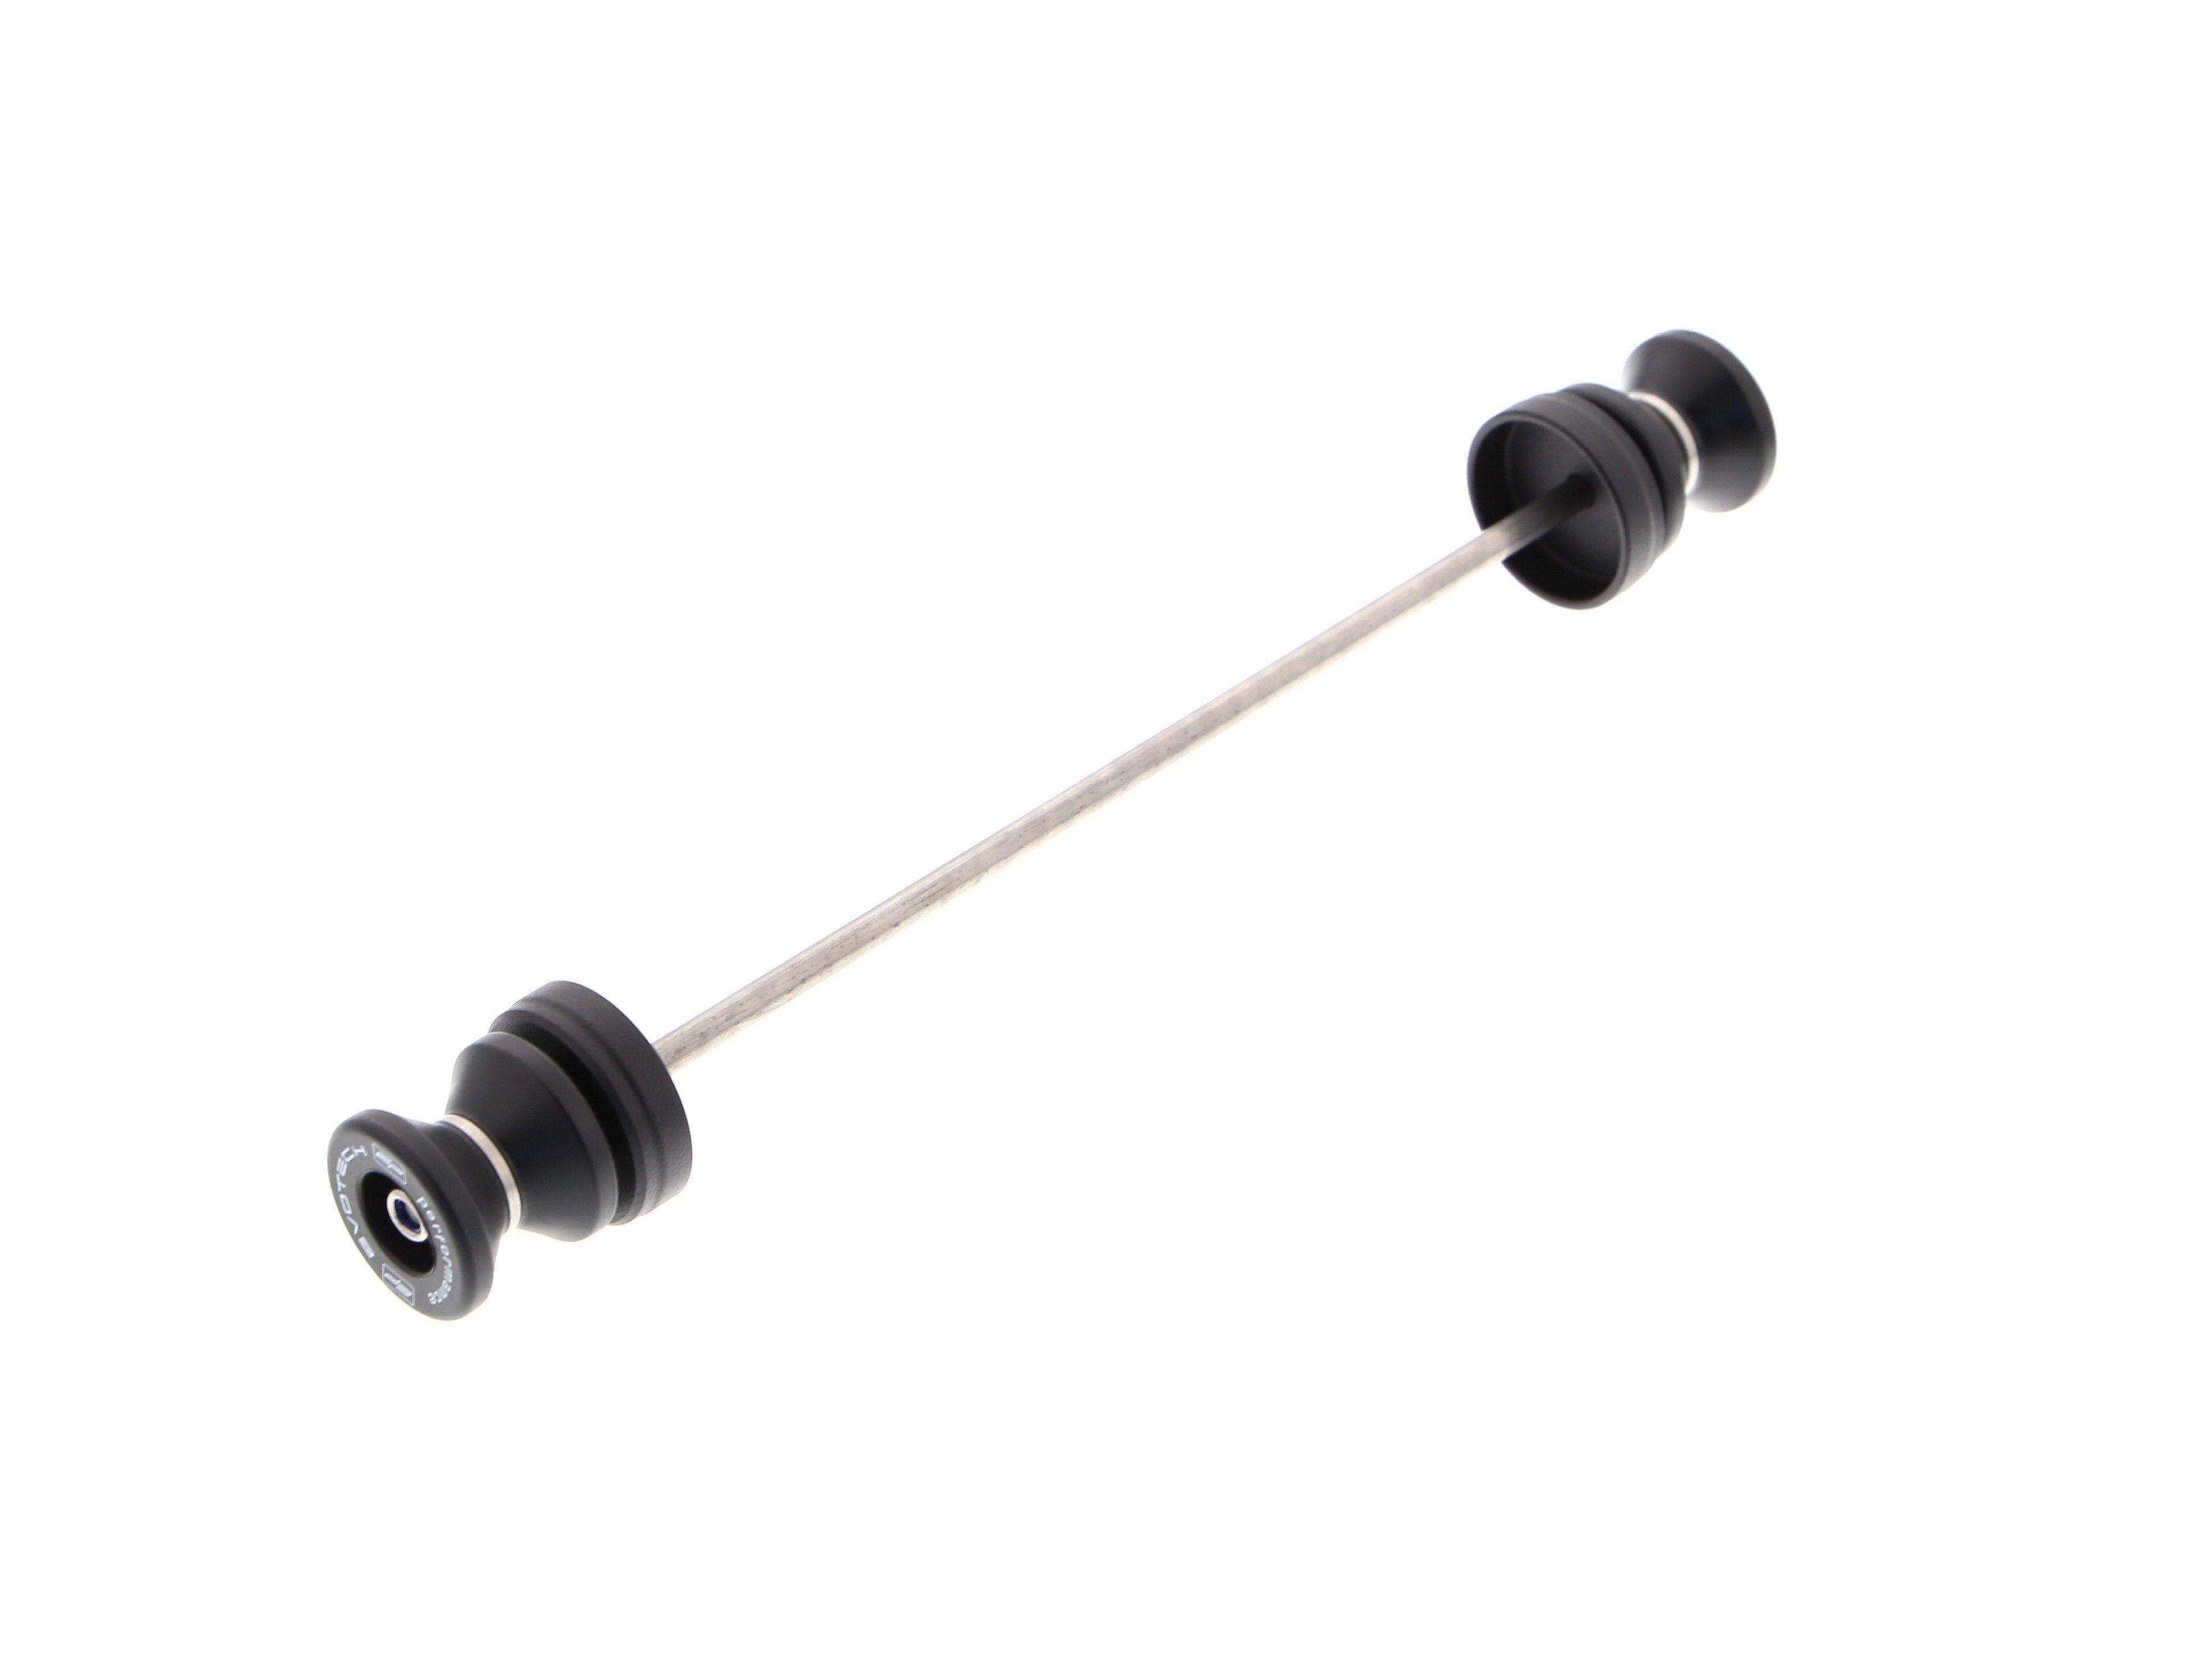 EP Paddock Stand Bobbins for the Ducati Scrambler Flat Tracker Pro comprises a spindle rod with EPâs signature nylon paddock stand bobbins either end with precision shaped aluminium spacer.